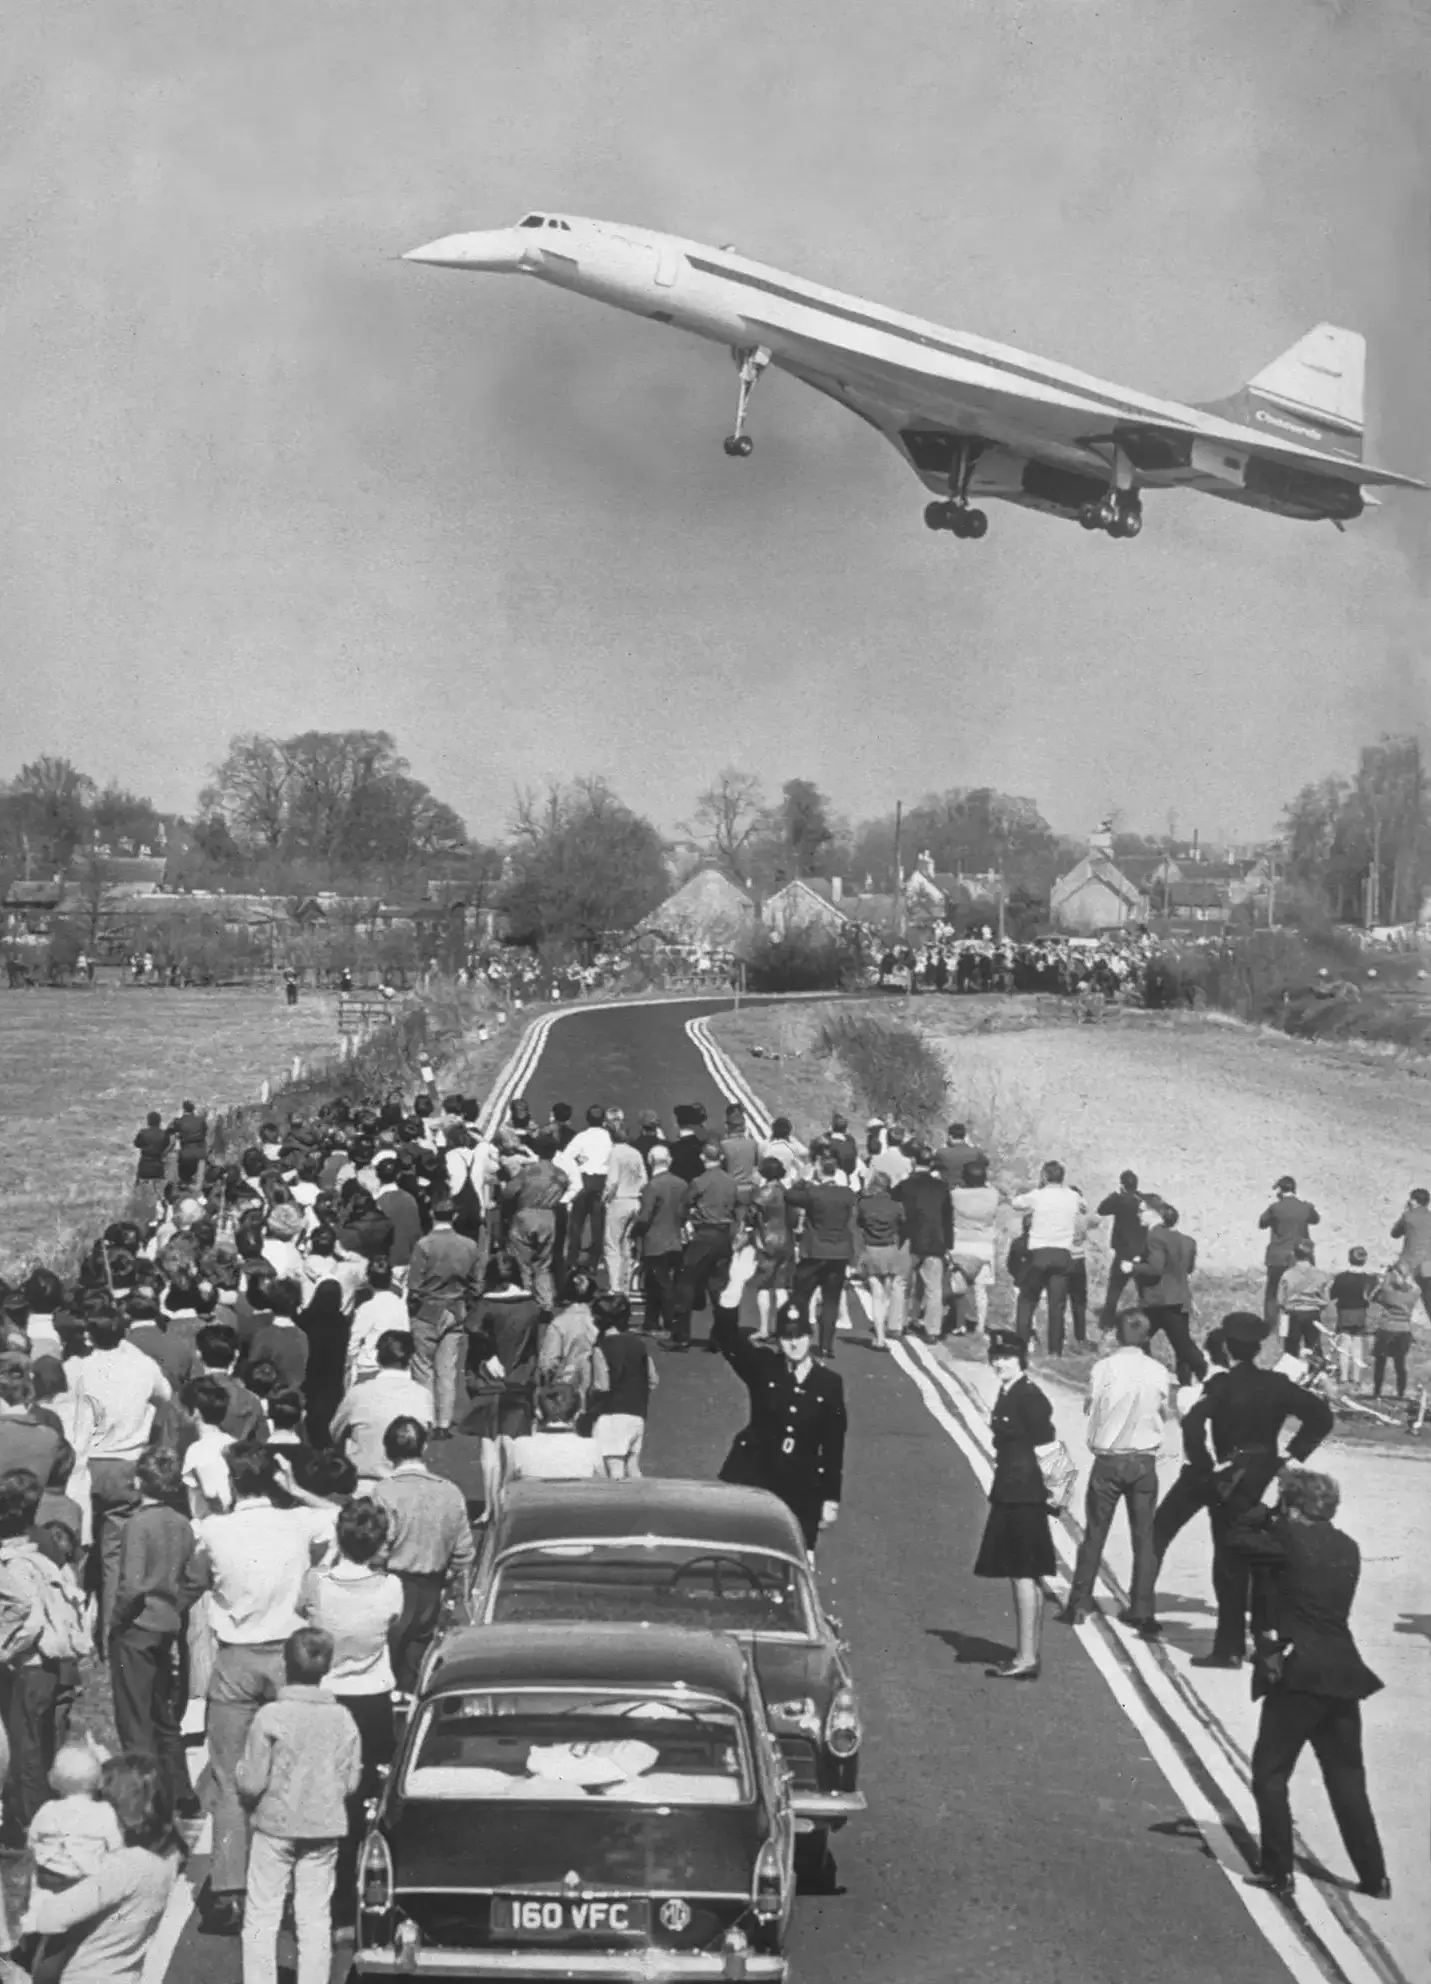 The Concorde aircraft flies low in the sky over a crowd of onlookers standing in the street below. The streamlined aircraft juxtaposes with the black and chrome mid-century cars stopped in the street.